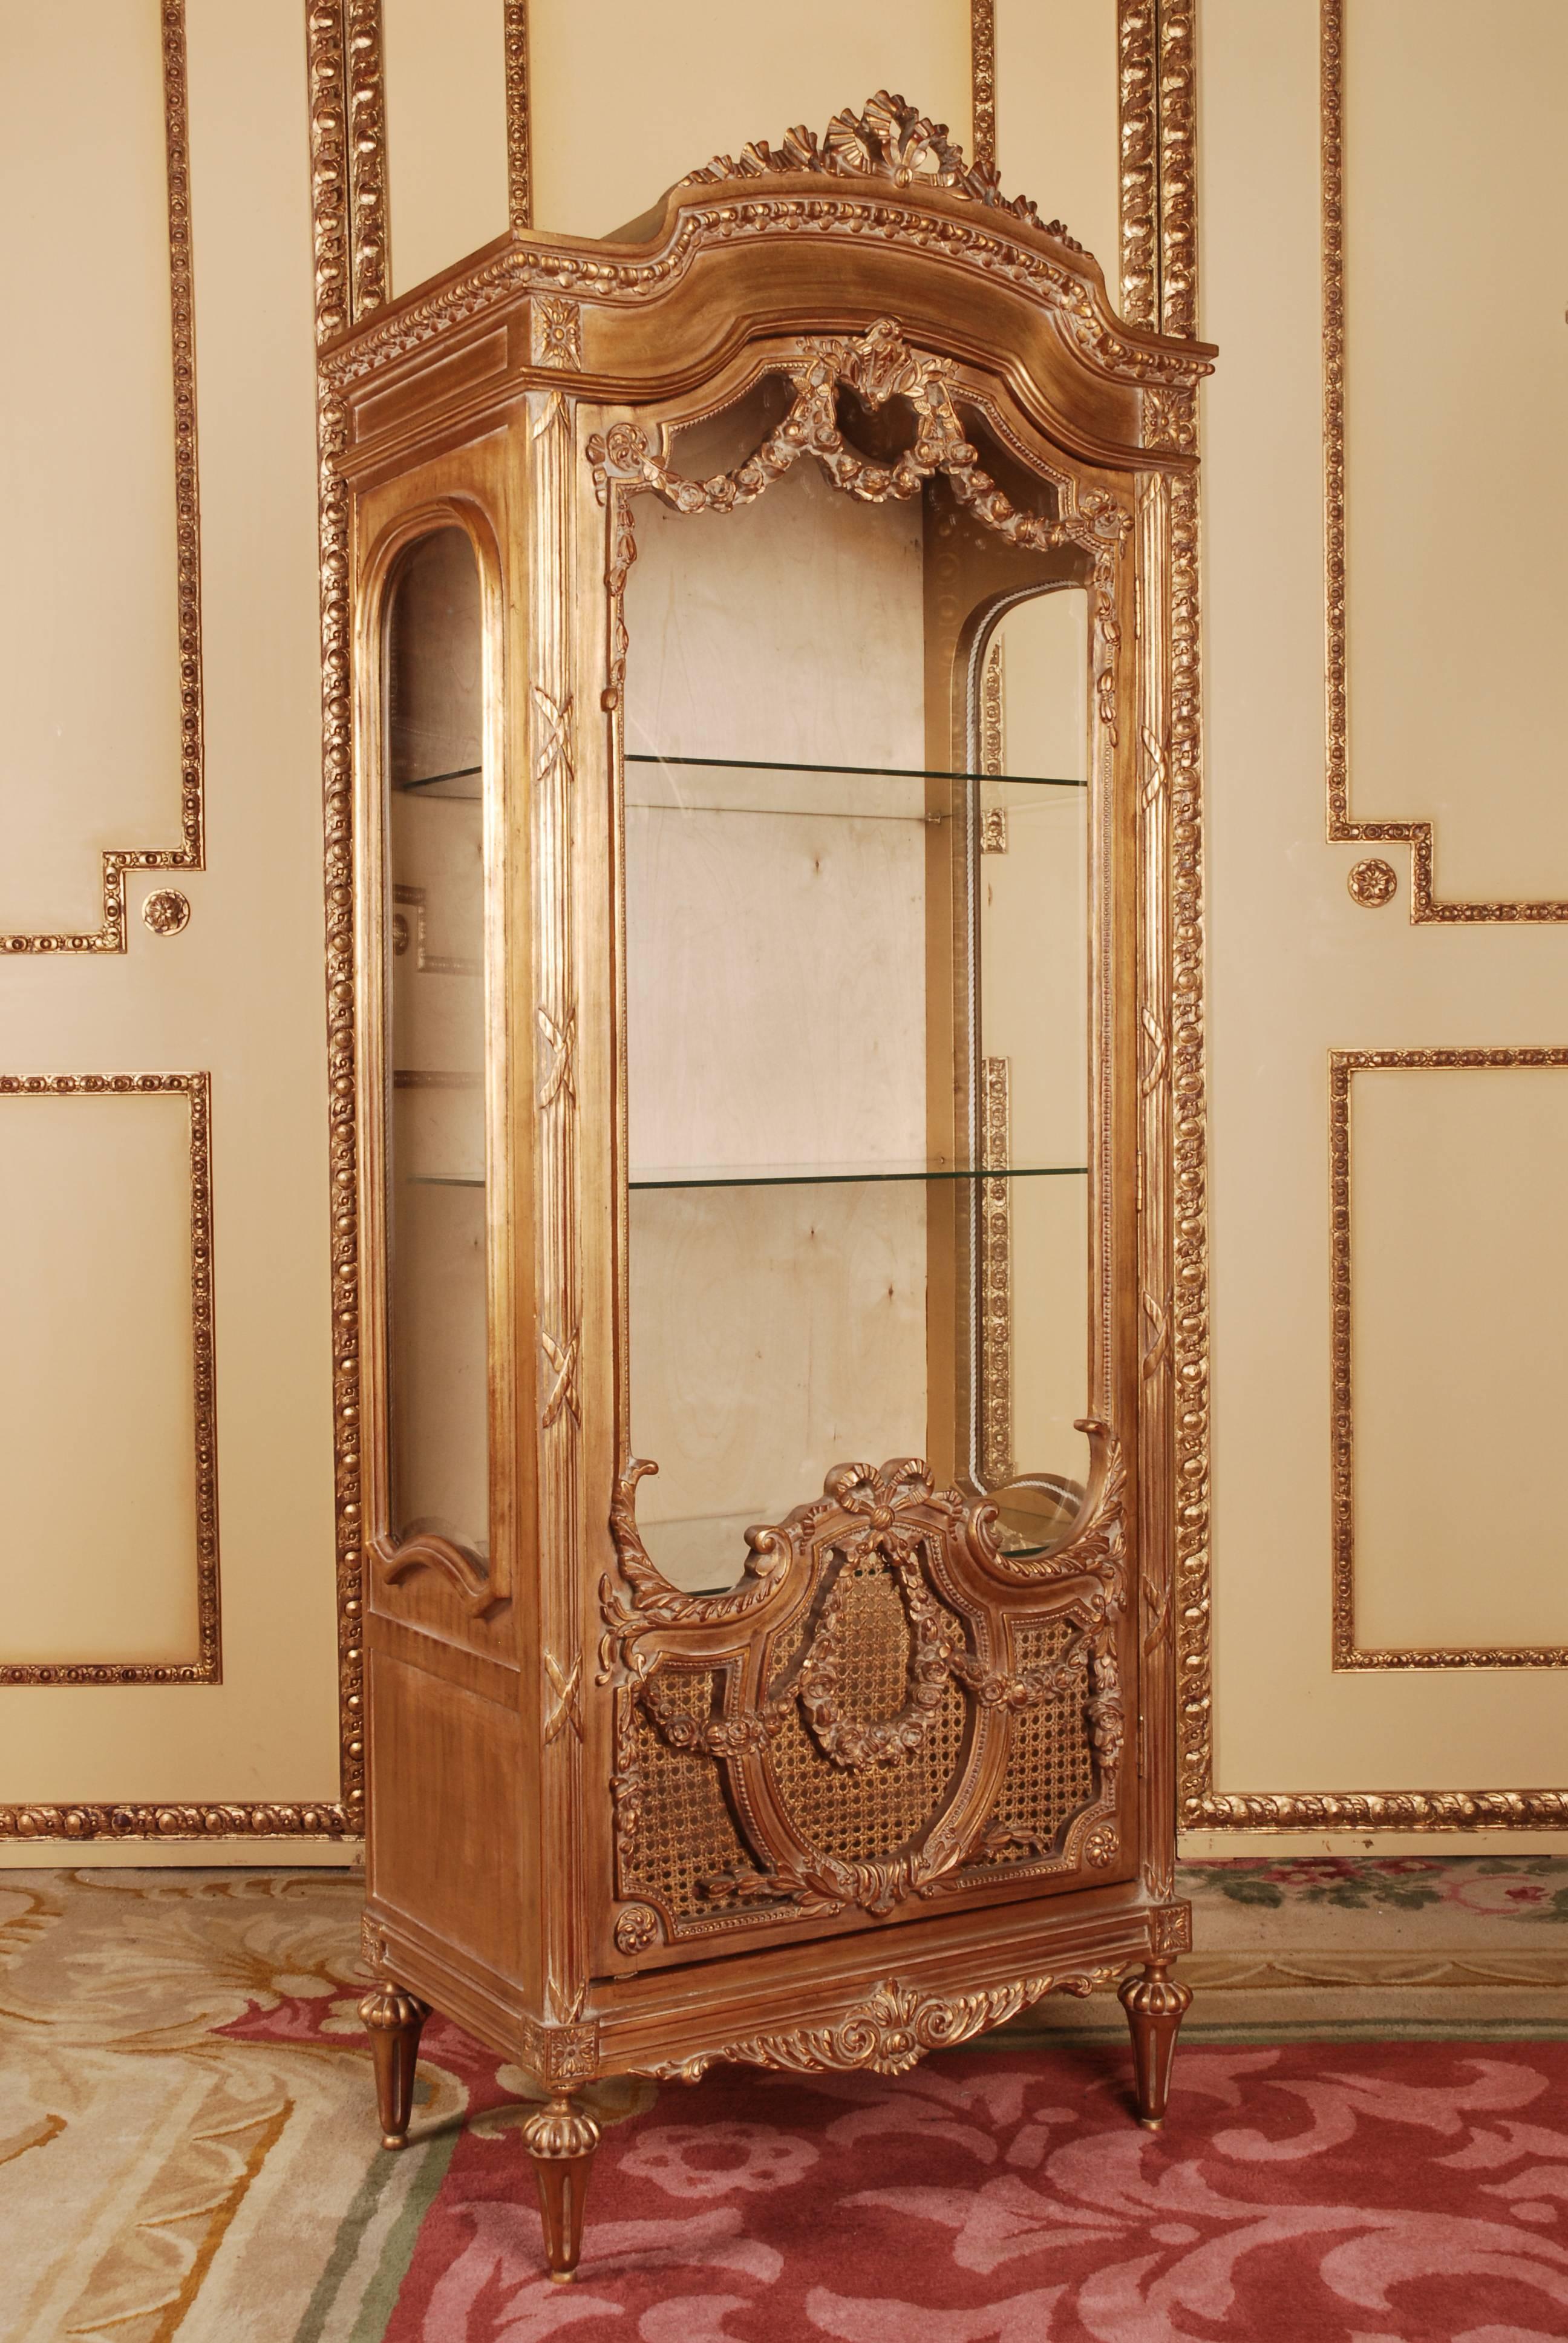 Solid beech, bole gilded. High-angled, three-sided, facet-cut glazed, one-door body on conical legs. The door is partially covered with wickerwork. The front, corners and sides are decorated with carved, classical elements such as garlands and